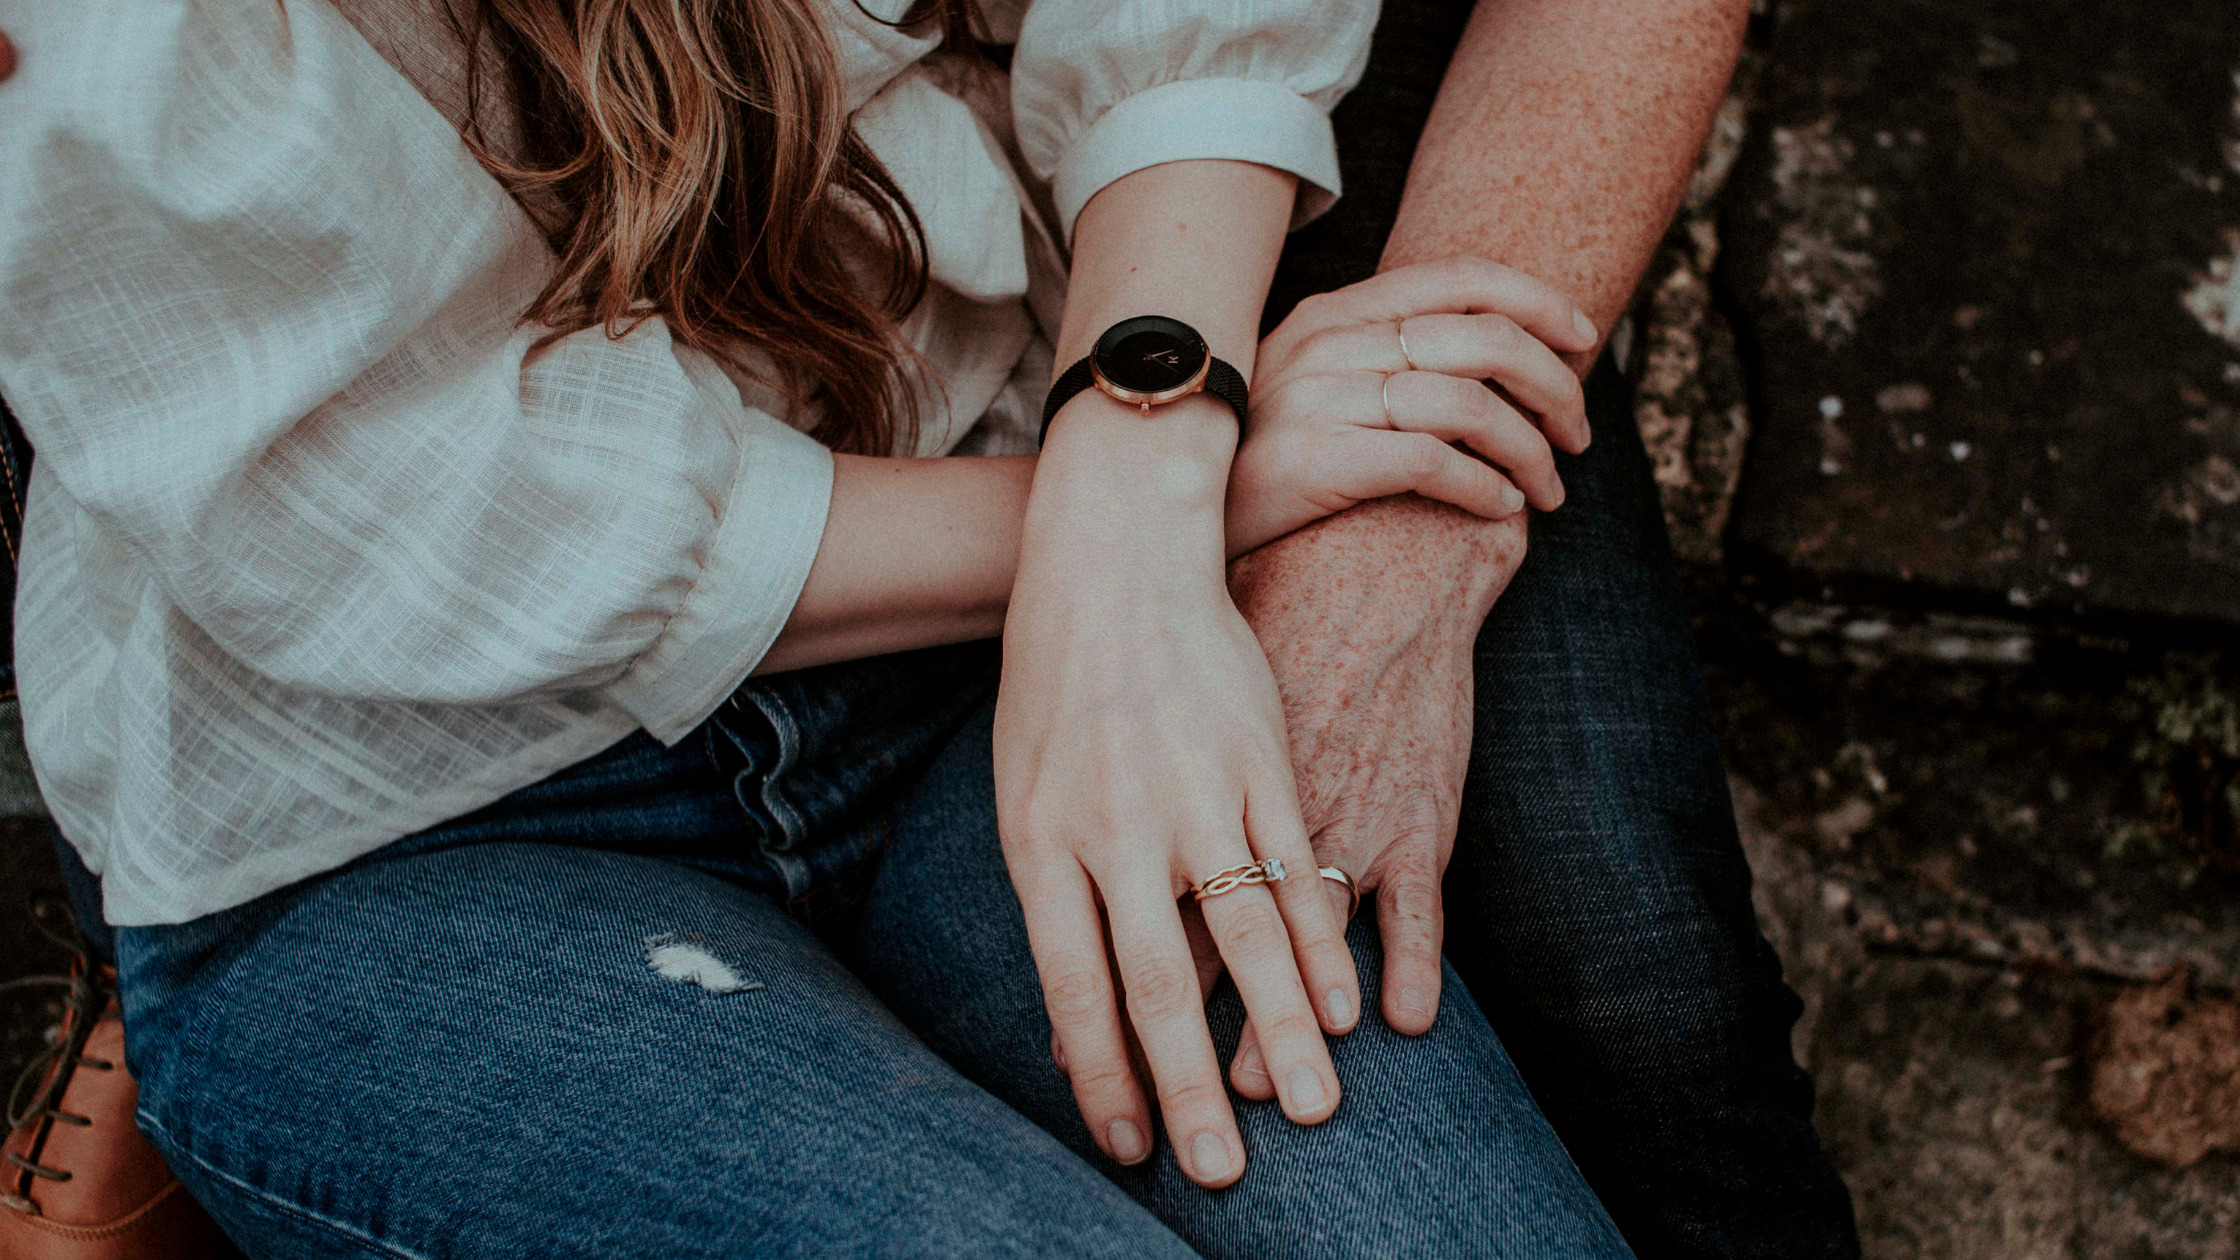 Learn How Relationship Therapy Can Help Couples Who Seek Marriage Therapy Or Couples Therapy. Learn How The 131 Relationship Questions Bring You Closer Together And Improve Your Relationship.